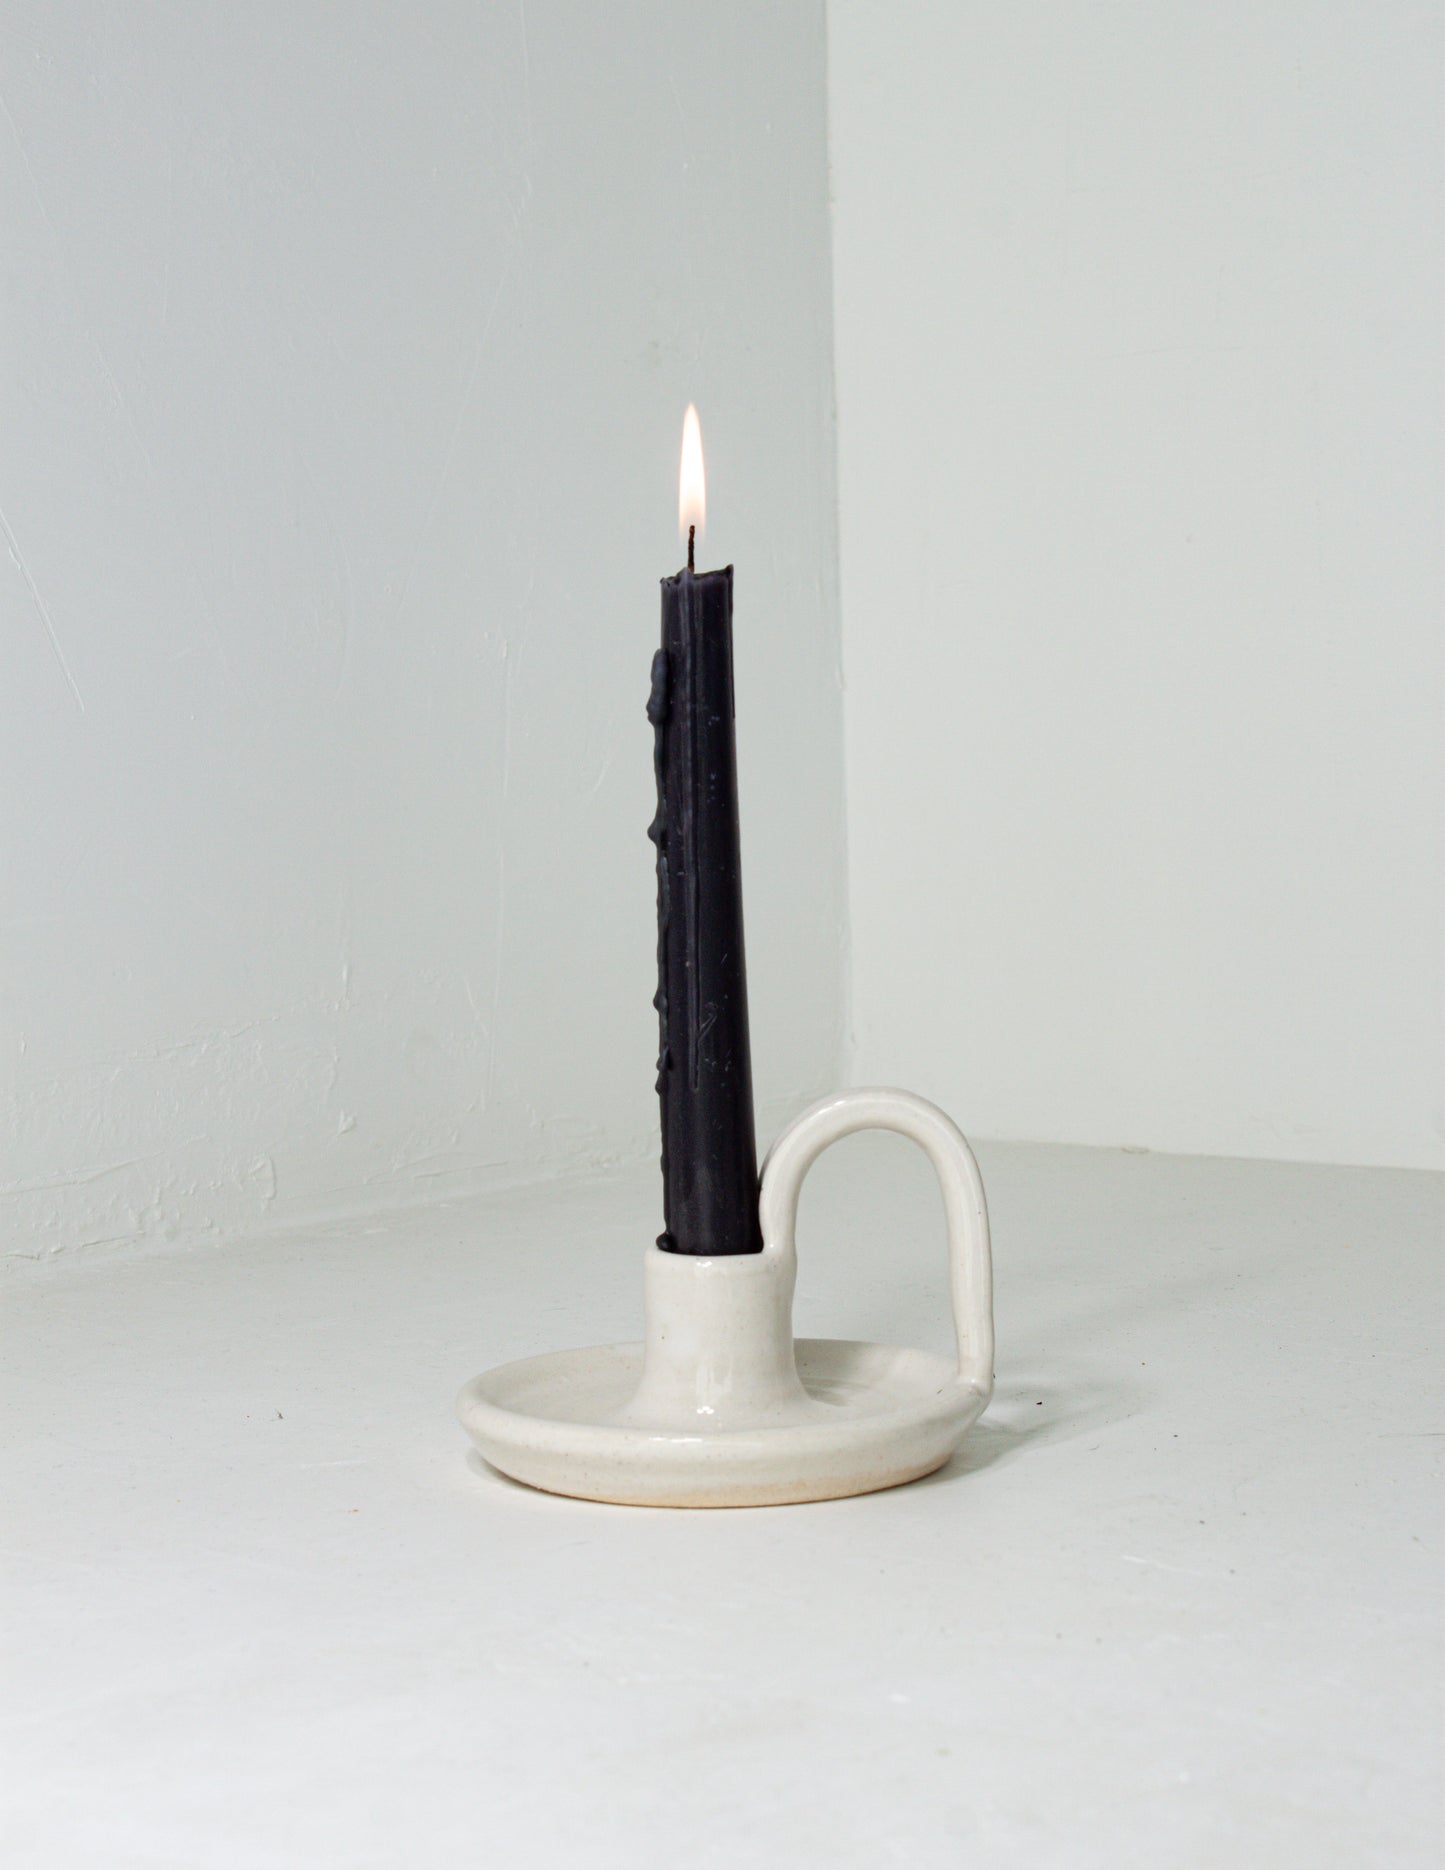 Handmade candlestick holder that is perfect for your household ceramic accessories